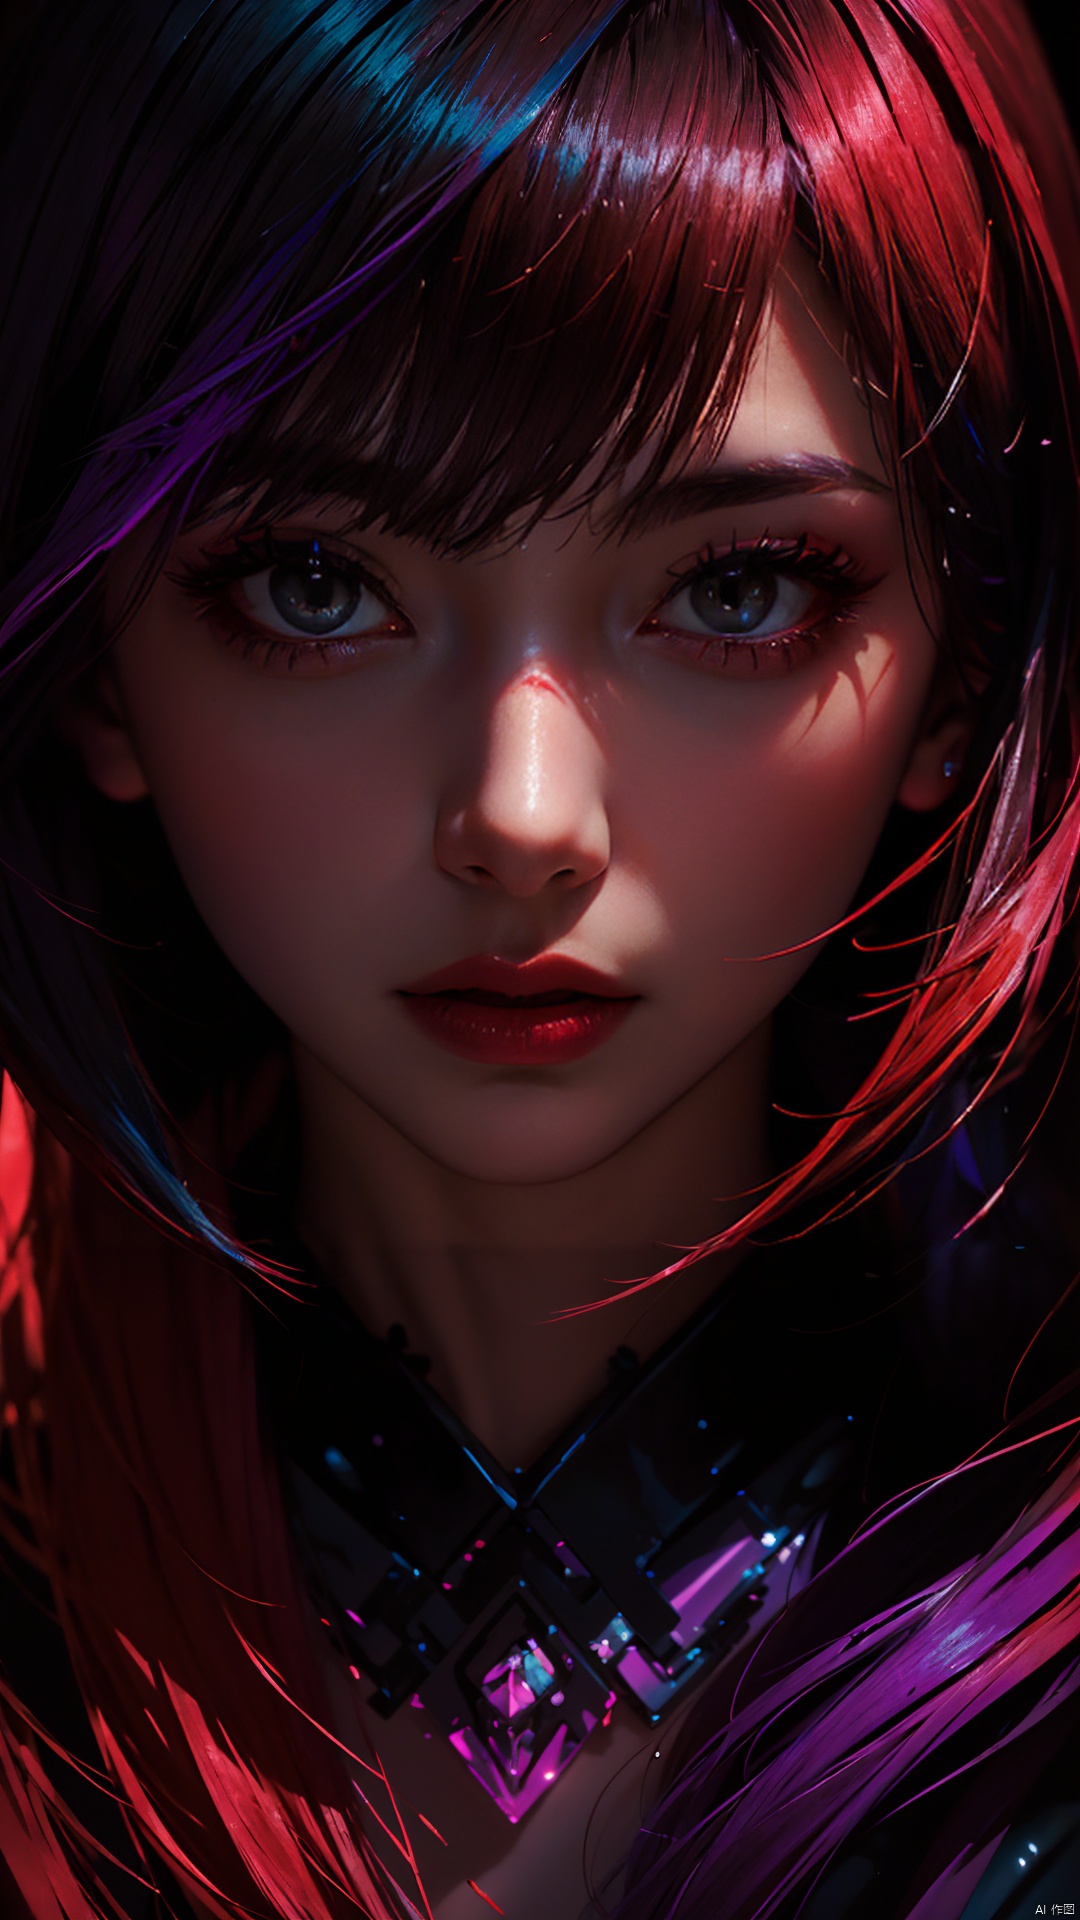 This artwork is an abstract art piece created in the style of Yuko Shimizu, with a dark red theme and a dark overall tone. It depicts a girl. It is a masterpiece of the highest quality, with ultra-high resolution.

neon lights, and vibrant colors, creating a stunning beauty. The entire scene is clean, futuristic, and of excellent quality. The highlights of blue and purple-red contrast sharply with the deep purple shadows, presenting a cinematic, high-definition, and gripping effect that is filled with exquisite delicacy.